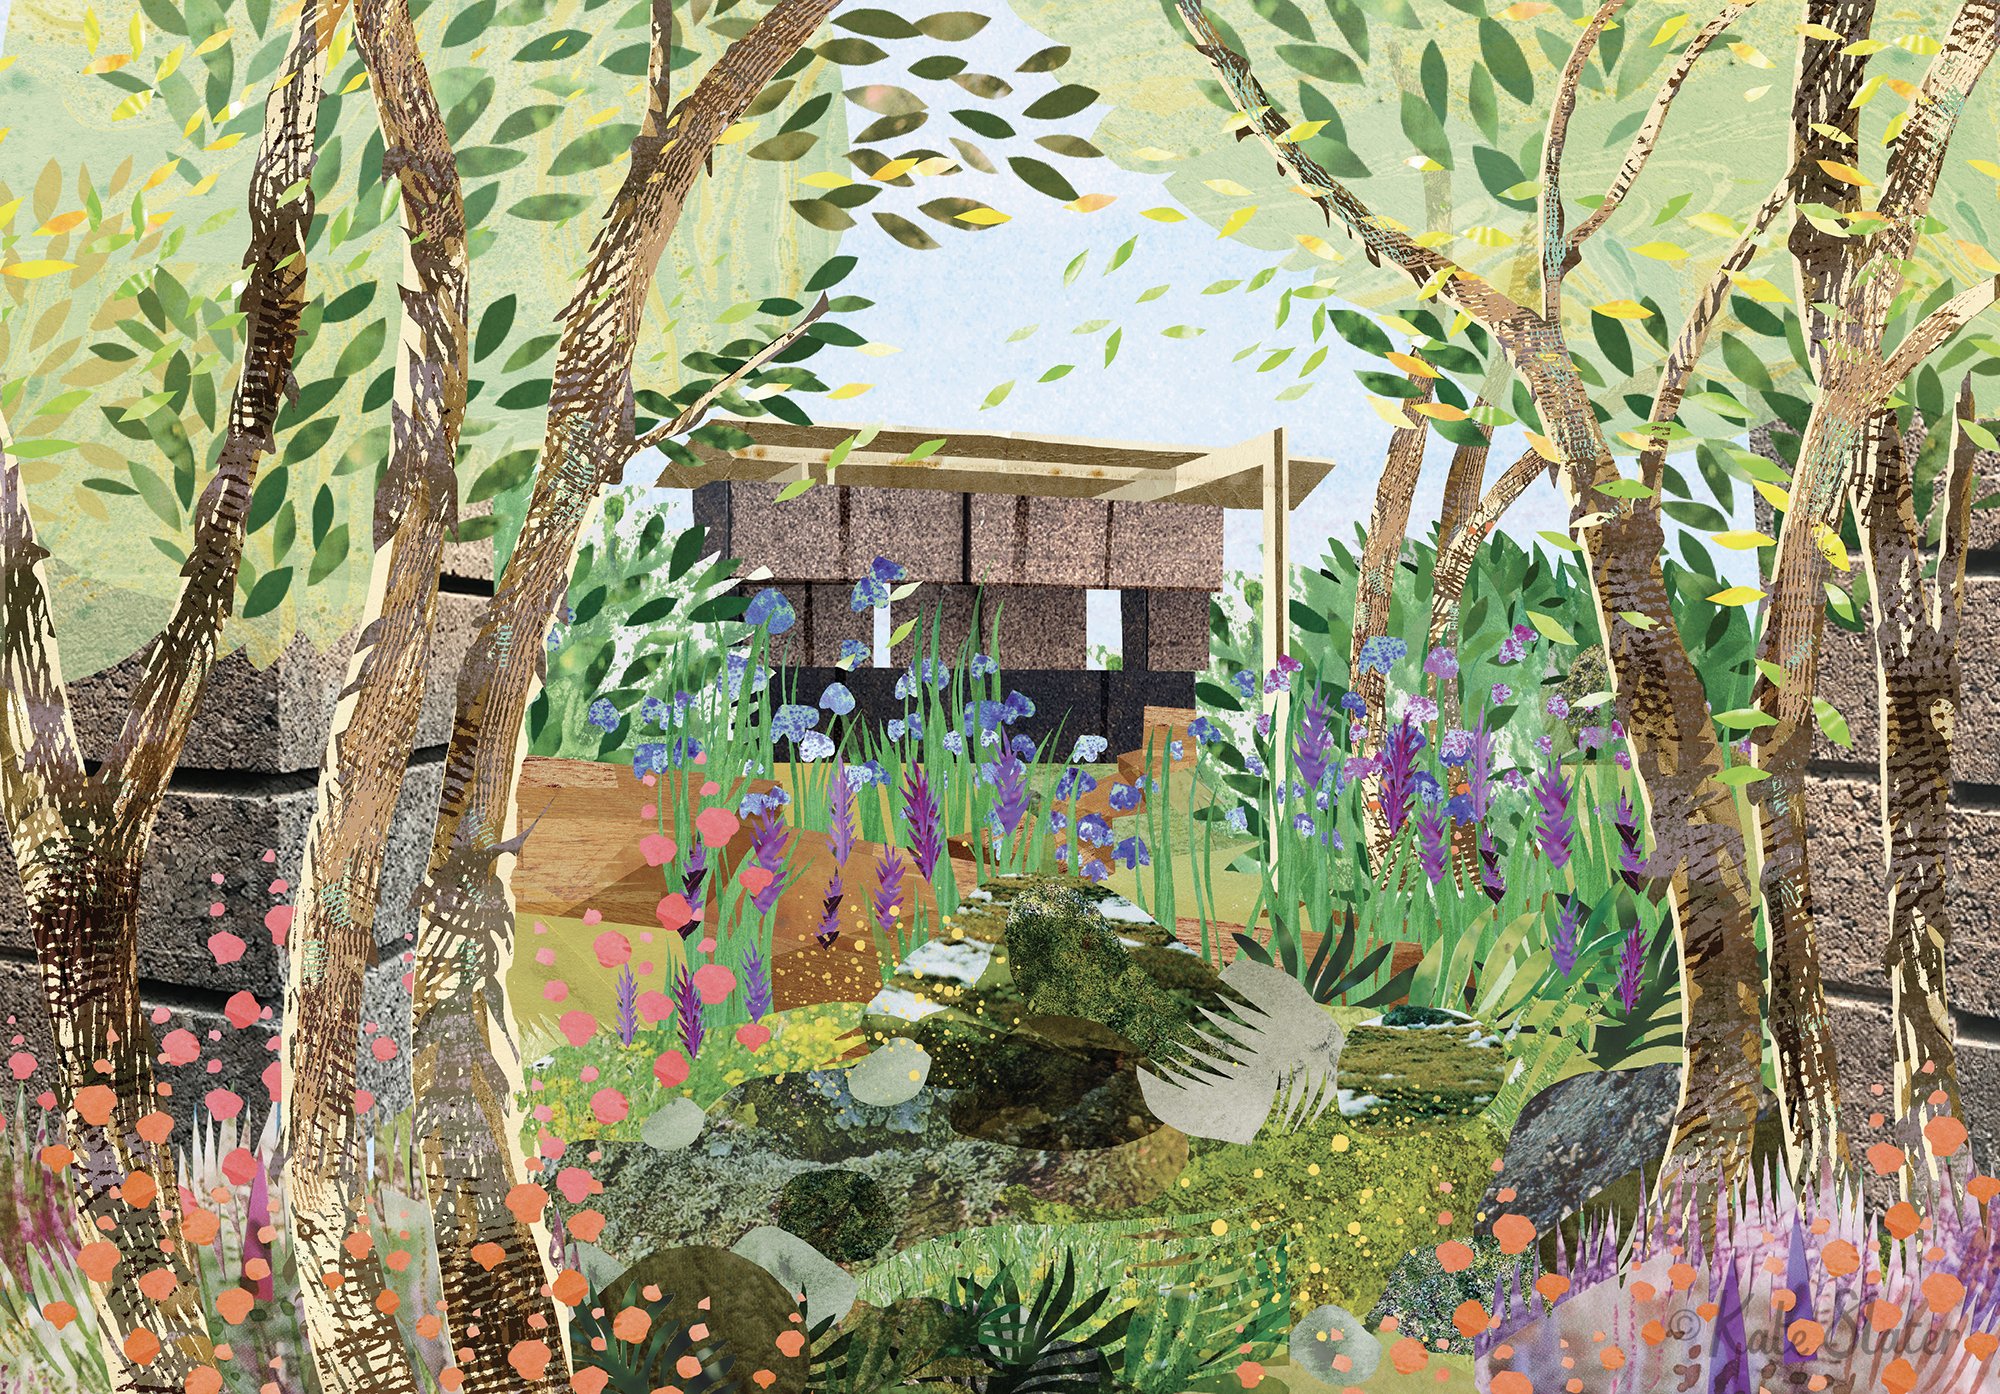 NATIONAL AUTISTIC SOCIETY - RHS CHELSEA FLOWER SHOW